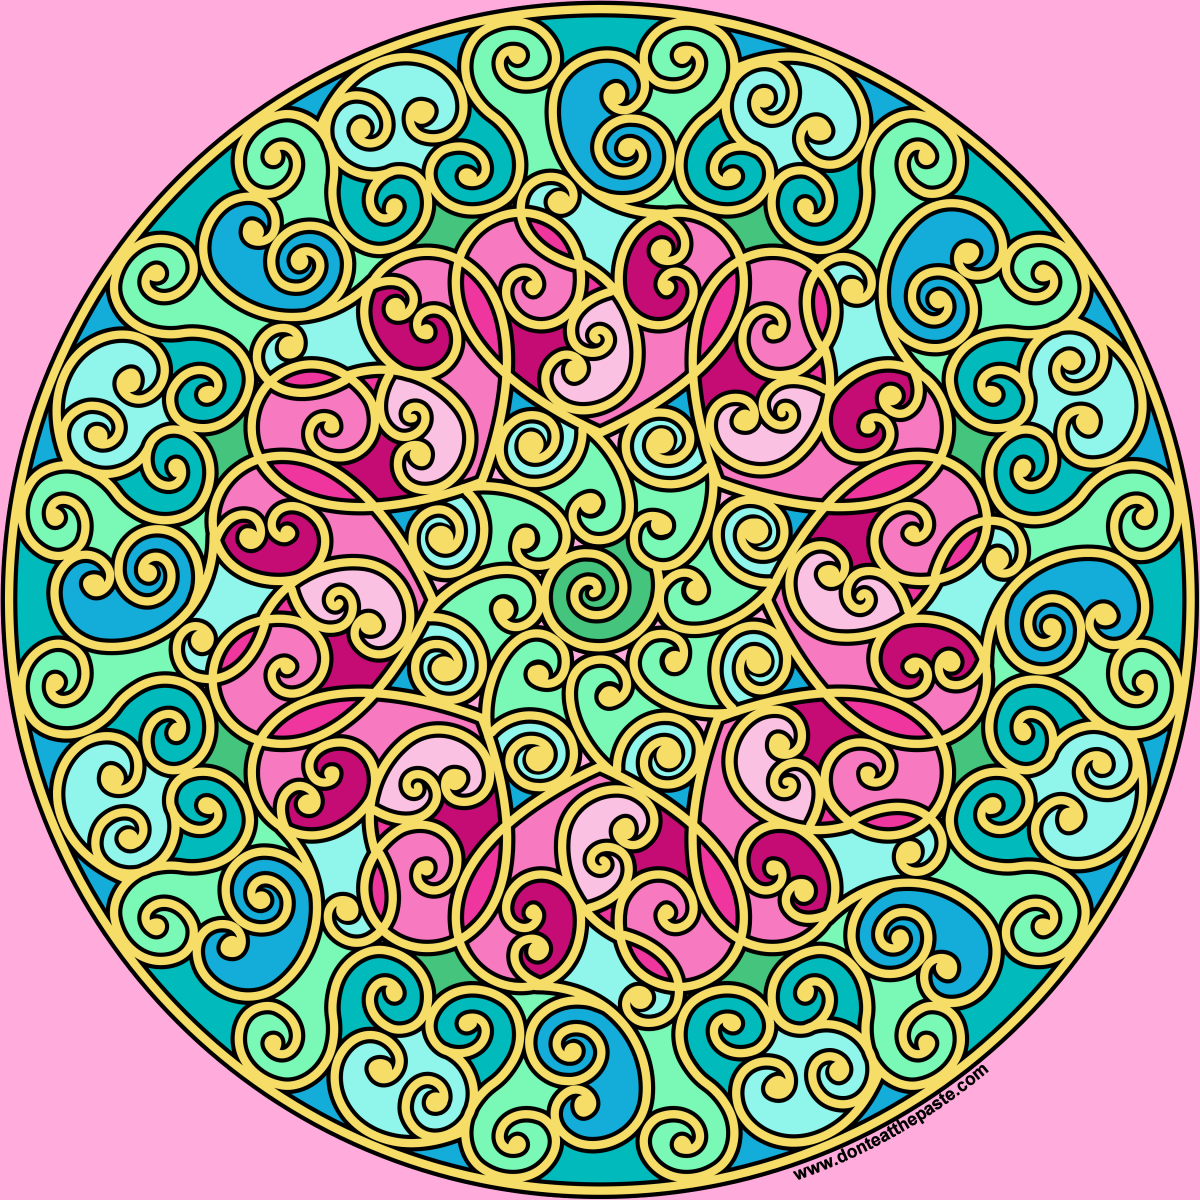 Download Don't Eat the Paste: Hidden Heart Mandala to color